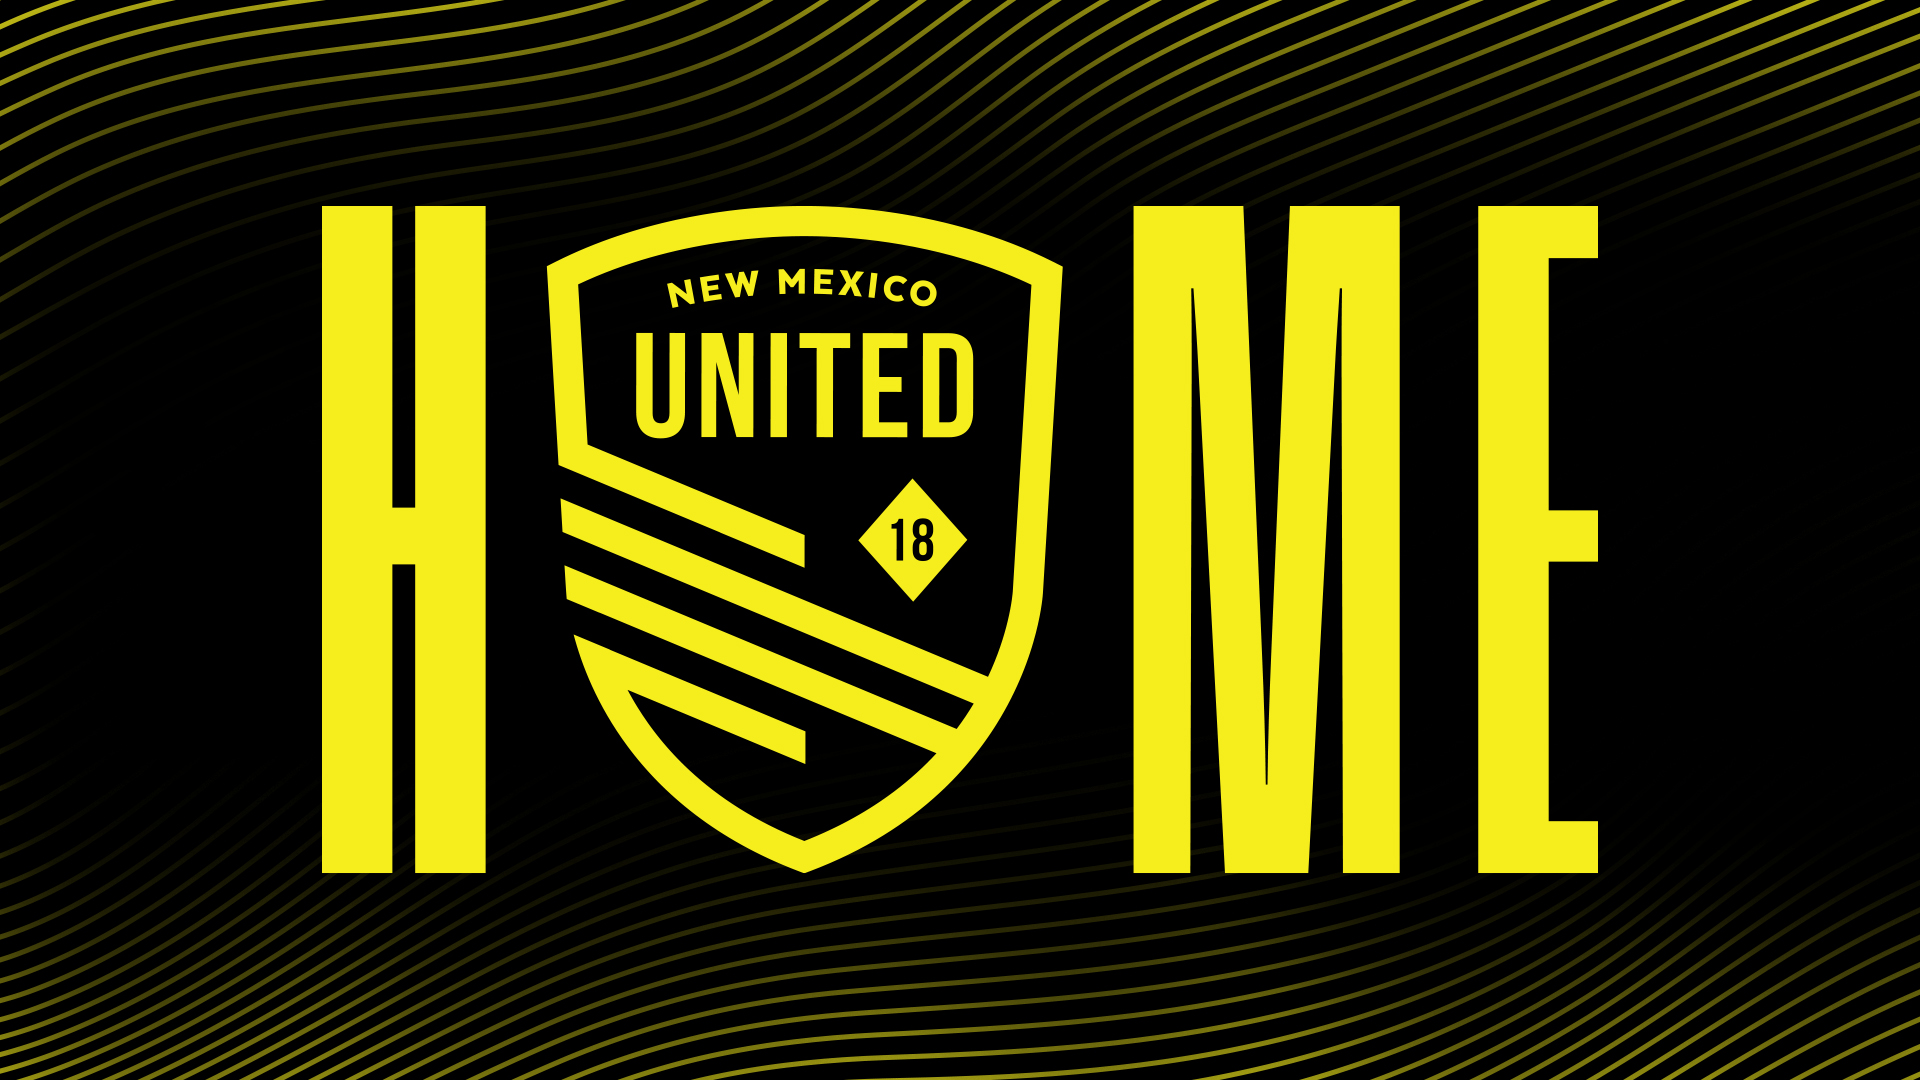 ALBUQUERQUE CITY COUNCIL APPROVES LEASE BETWEEN NEW MEXICO UNITED & CITY OF ALBUQUERQUE FOR PRIVATE CONSTRUCTION OF SOCCER STADIUM AT BALLOON FIESTA PARK – New Mexico United